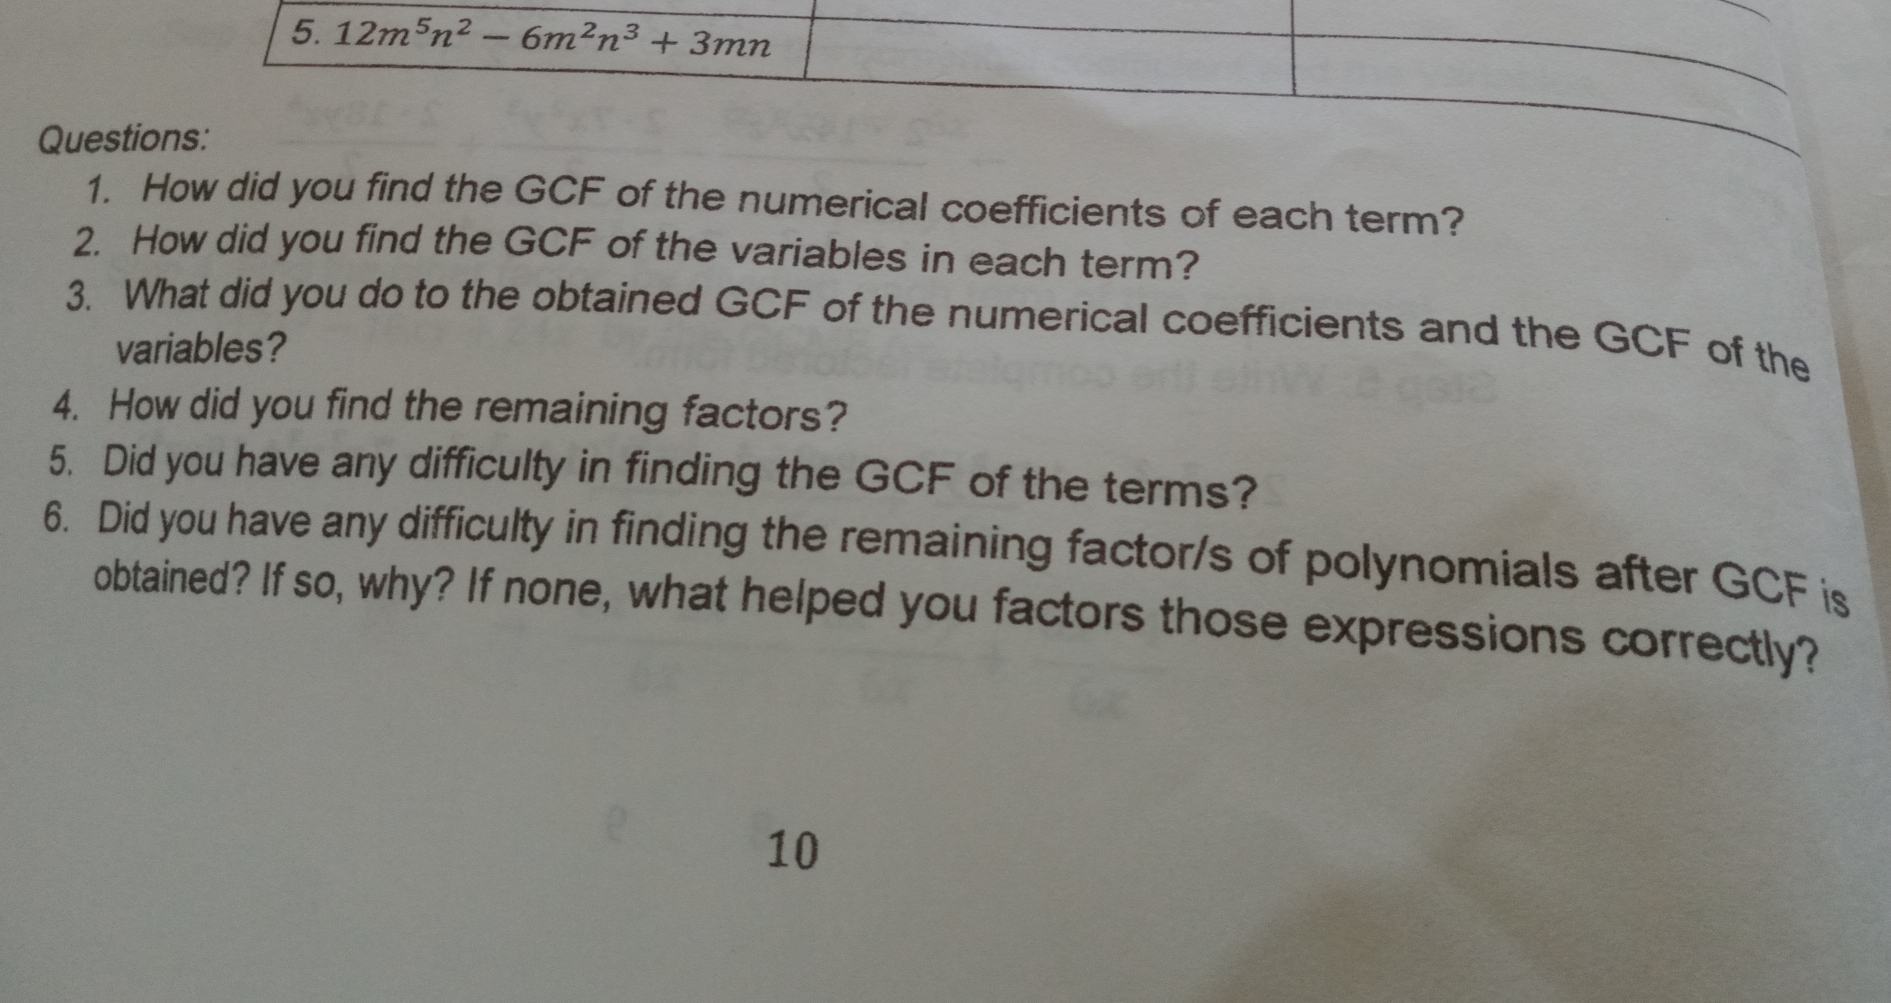 Questions: 1. How did you find the GCF of the numerical coefficients of each term? 2. How did you find the GCF of the variables in each term? 3. What did you do to the obtained GCF of the numerical coefficients and the GCF of the variables? 4. How did you find the remaining factors? 5. Did you have any difficulty in finding the GCF of the terms? 6. Did you have any difficulty in finding the remaining factor/s of polynomials after GCF is obtained? If so, why? If none, what helped you factors those expressions correctly? 10